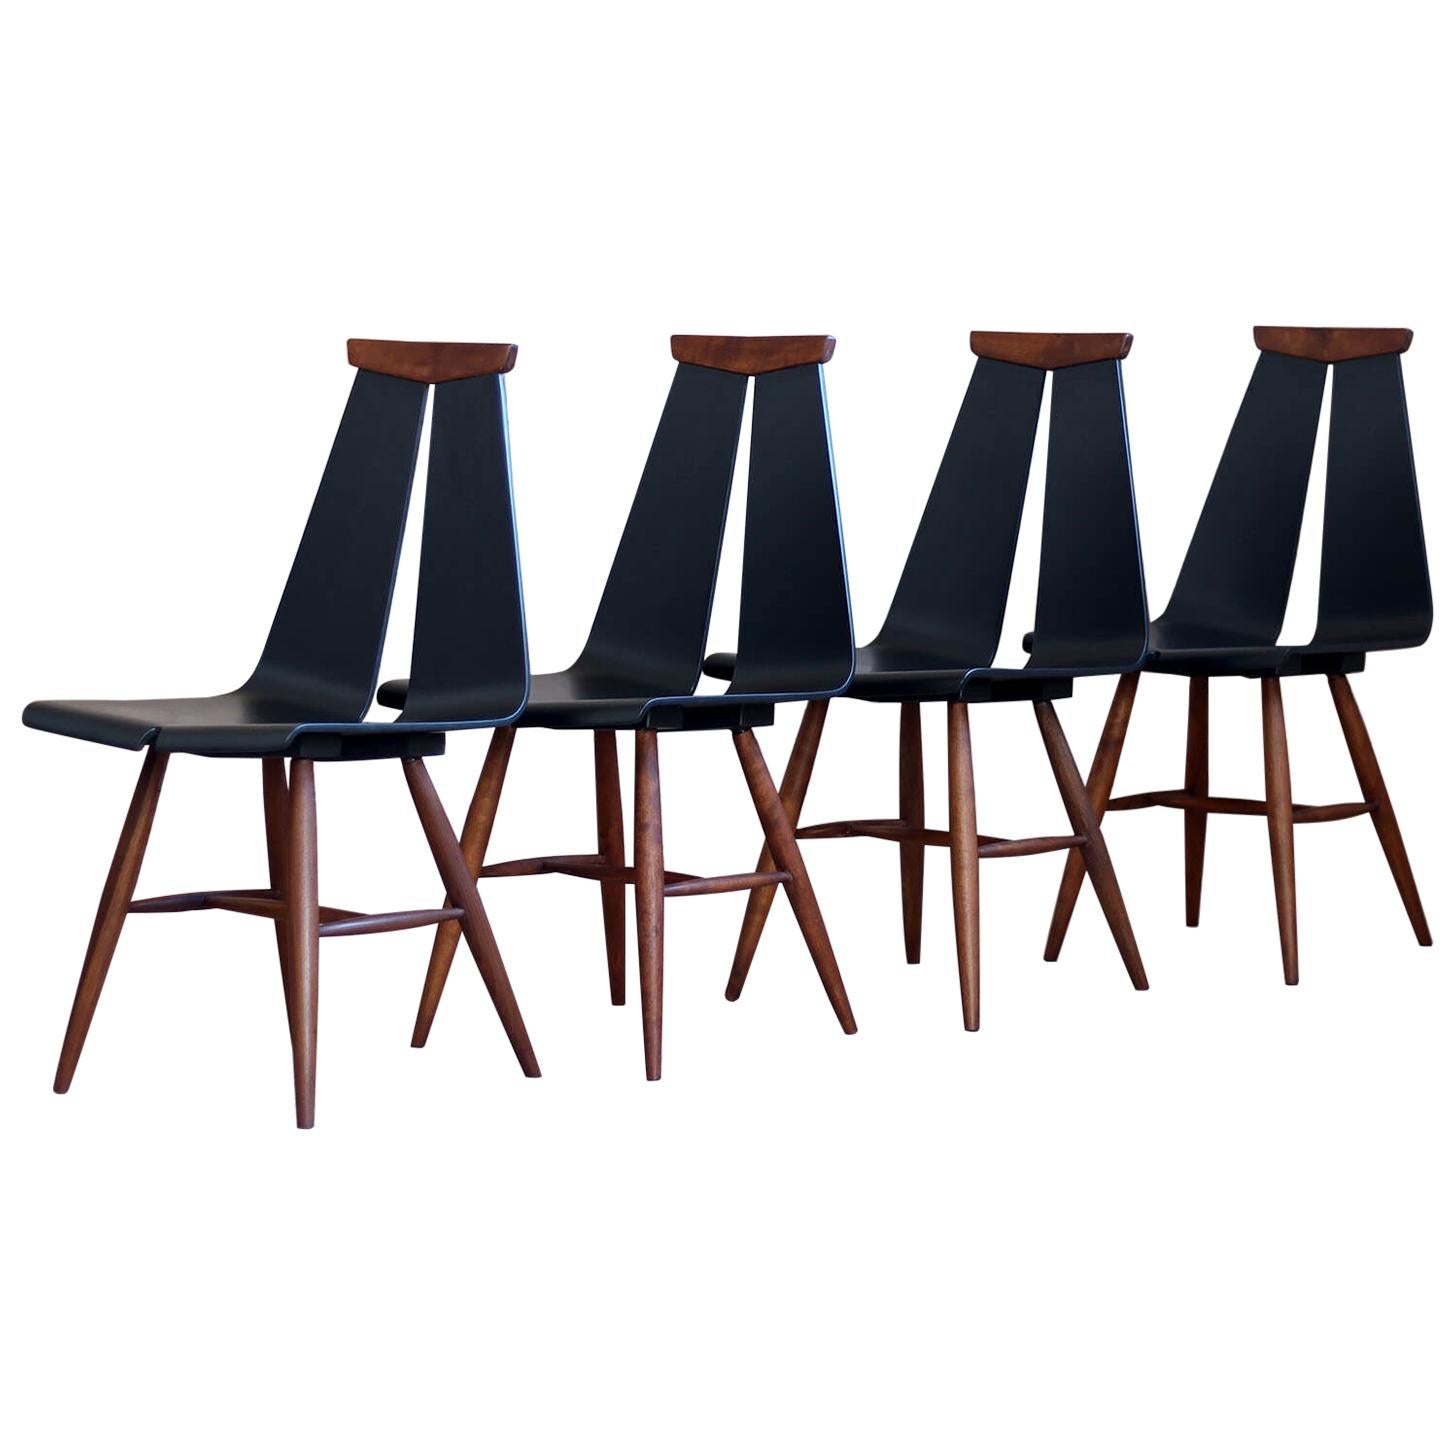 Set of 4 Dining Chairs by Risto Halme for Isku, Finland, 1960s